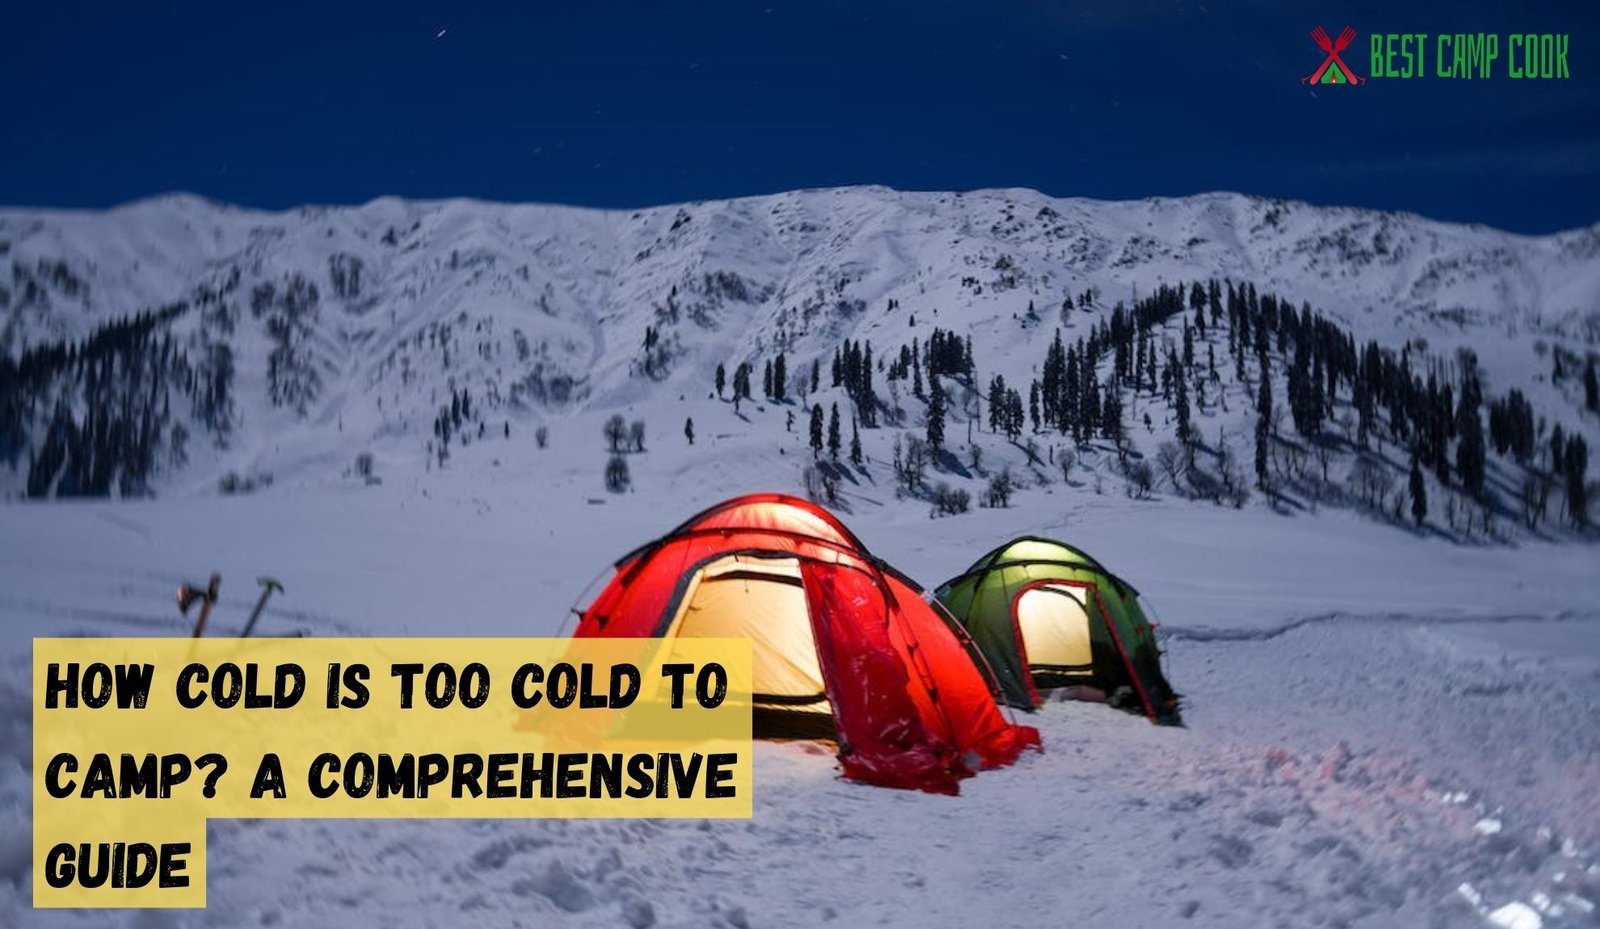 How Cold is Too Cold to Camp in Winter